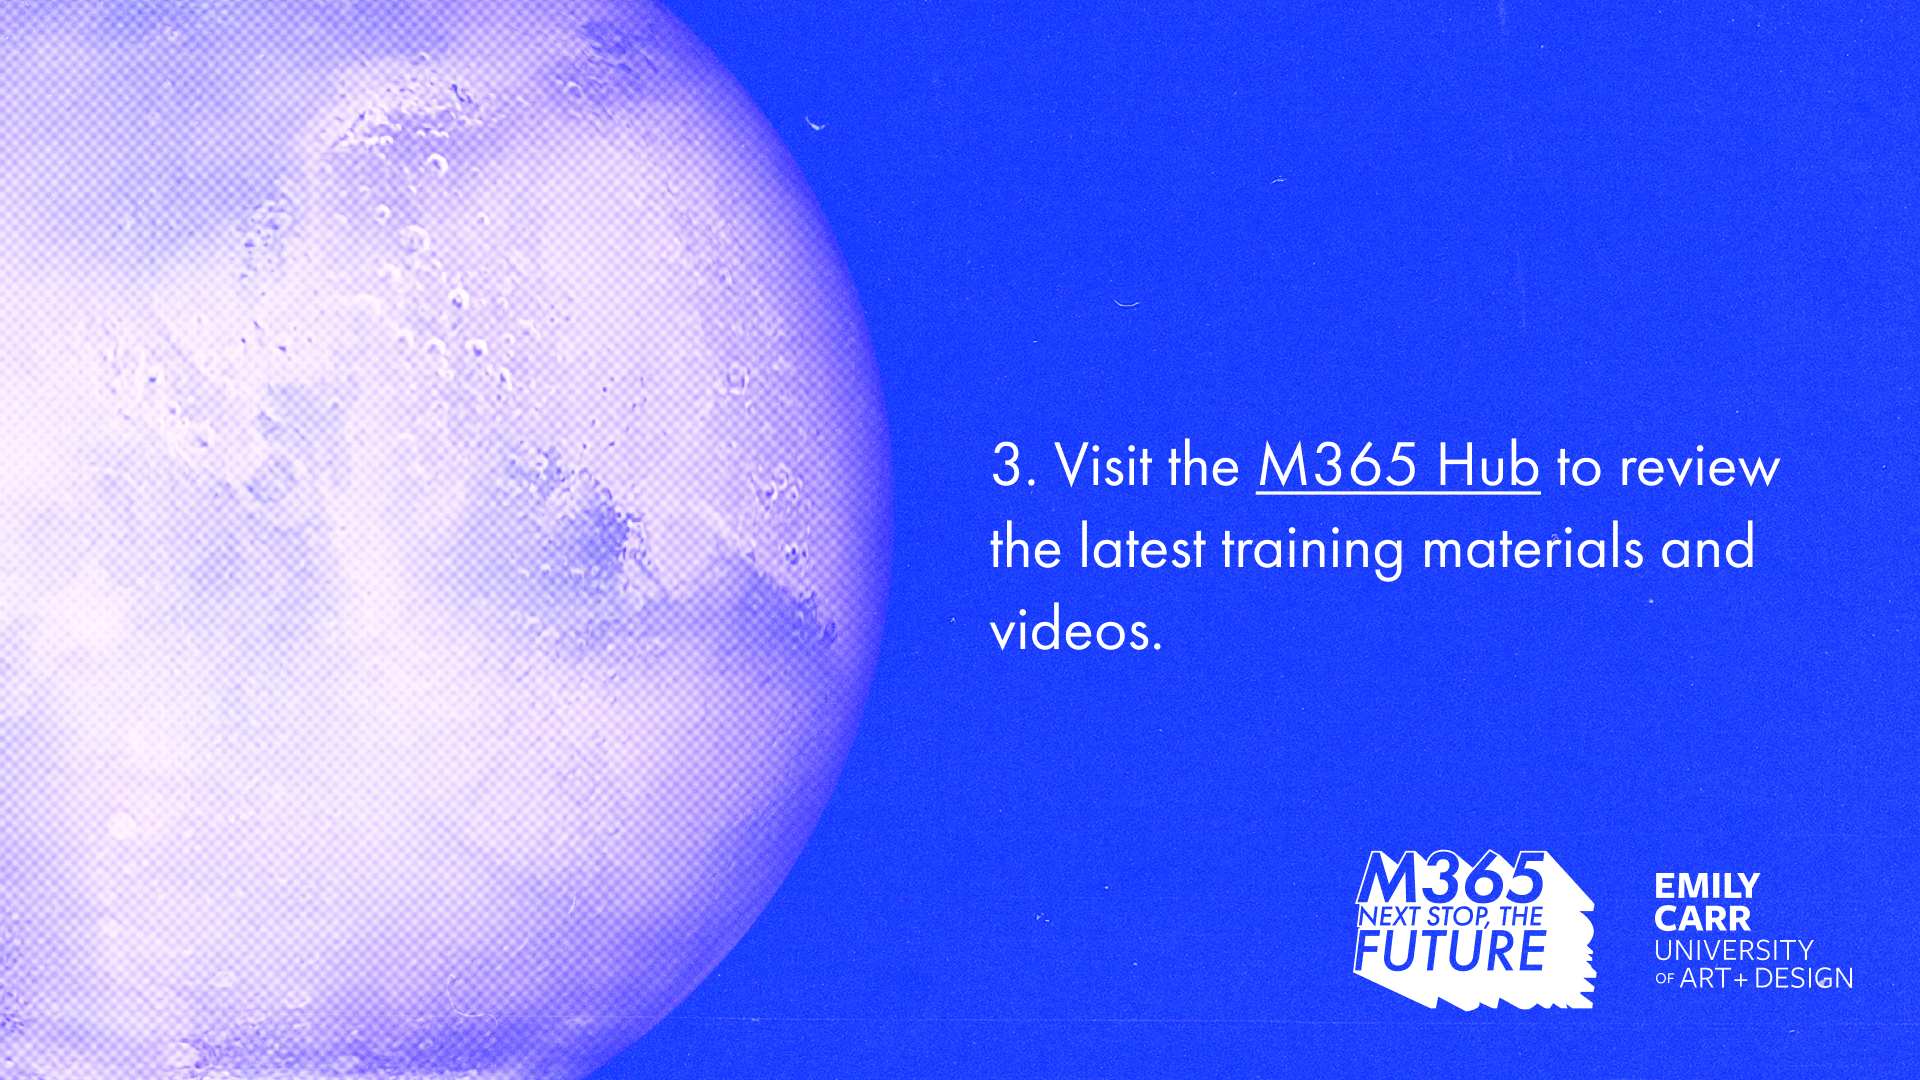 Text reads, "Visit the M365 Hub to review the latest training materials and videos."